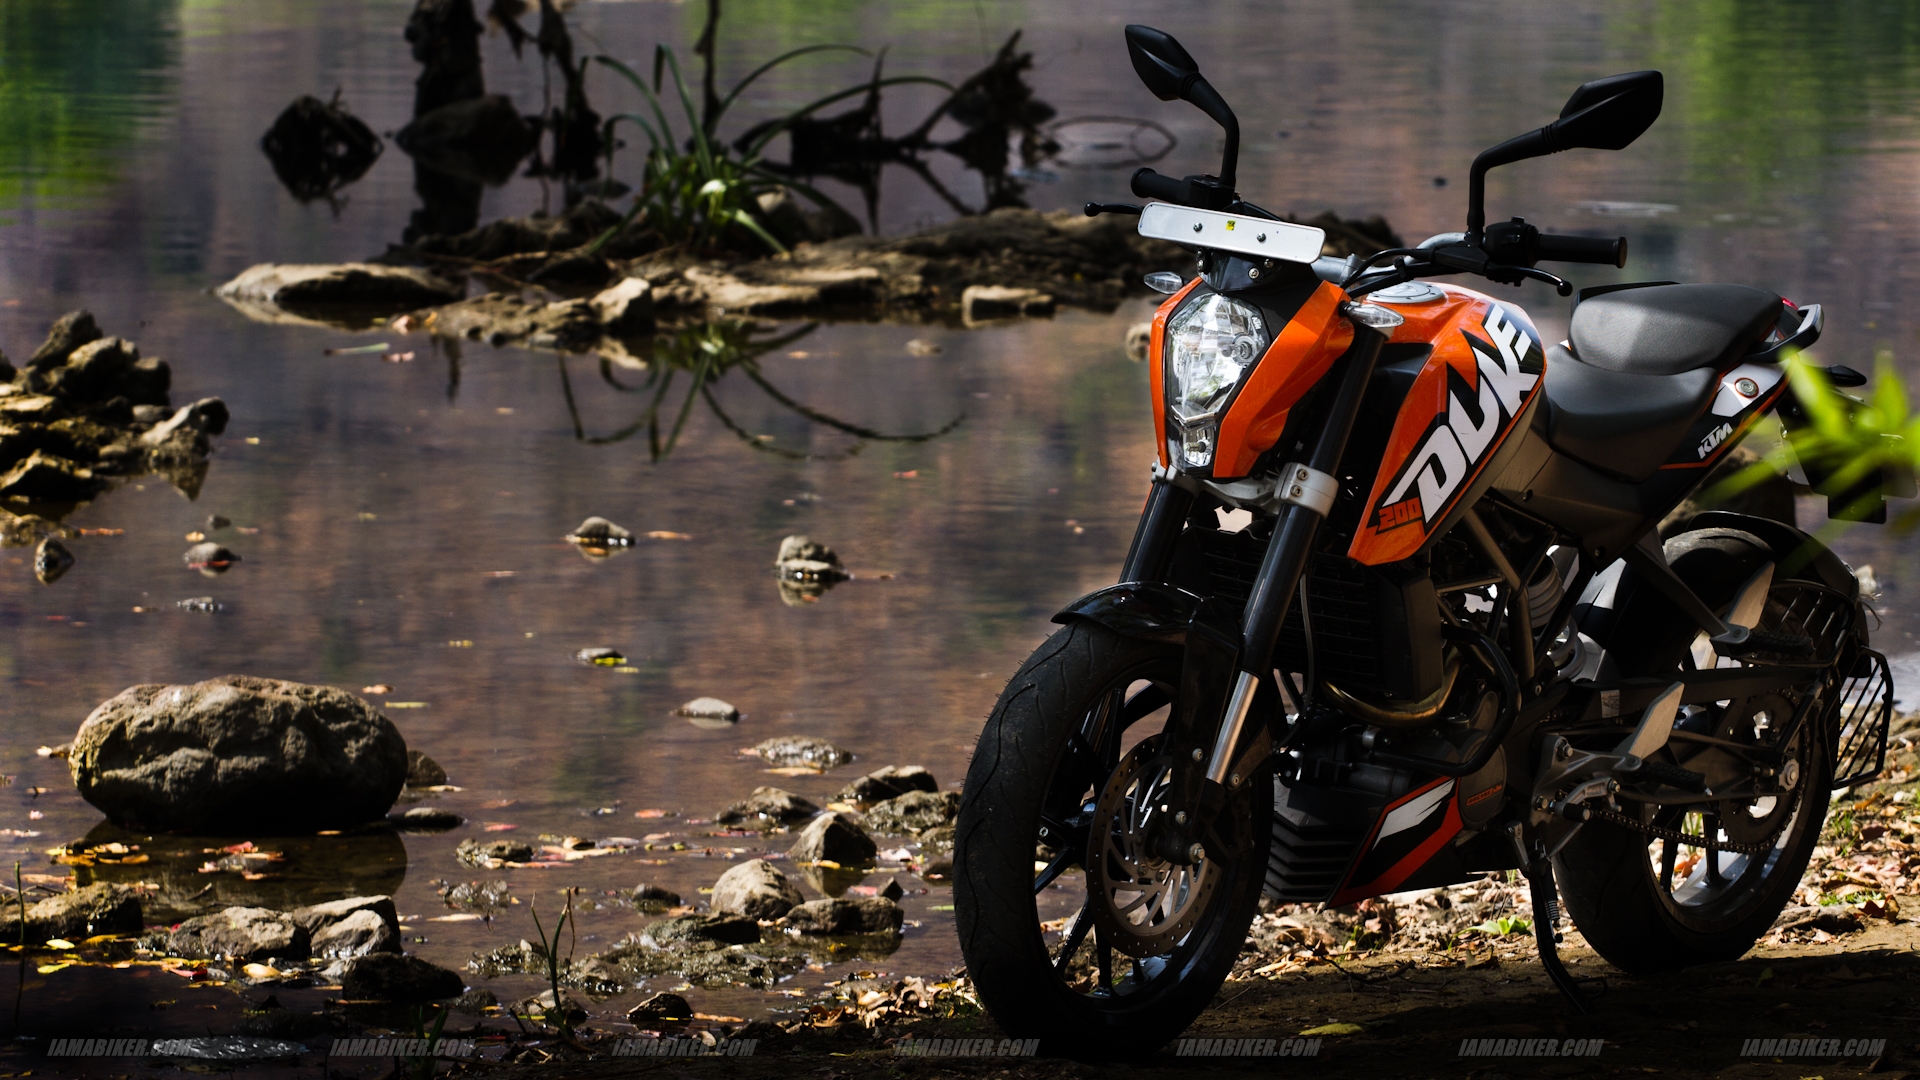 KTM Duke 200 HD wallpaper gallery Click on picture to see high 1920x1080